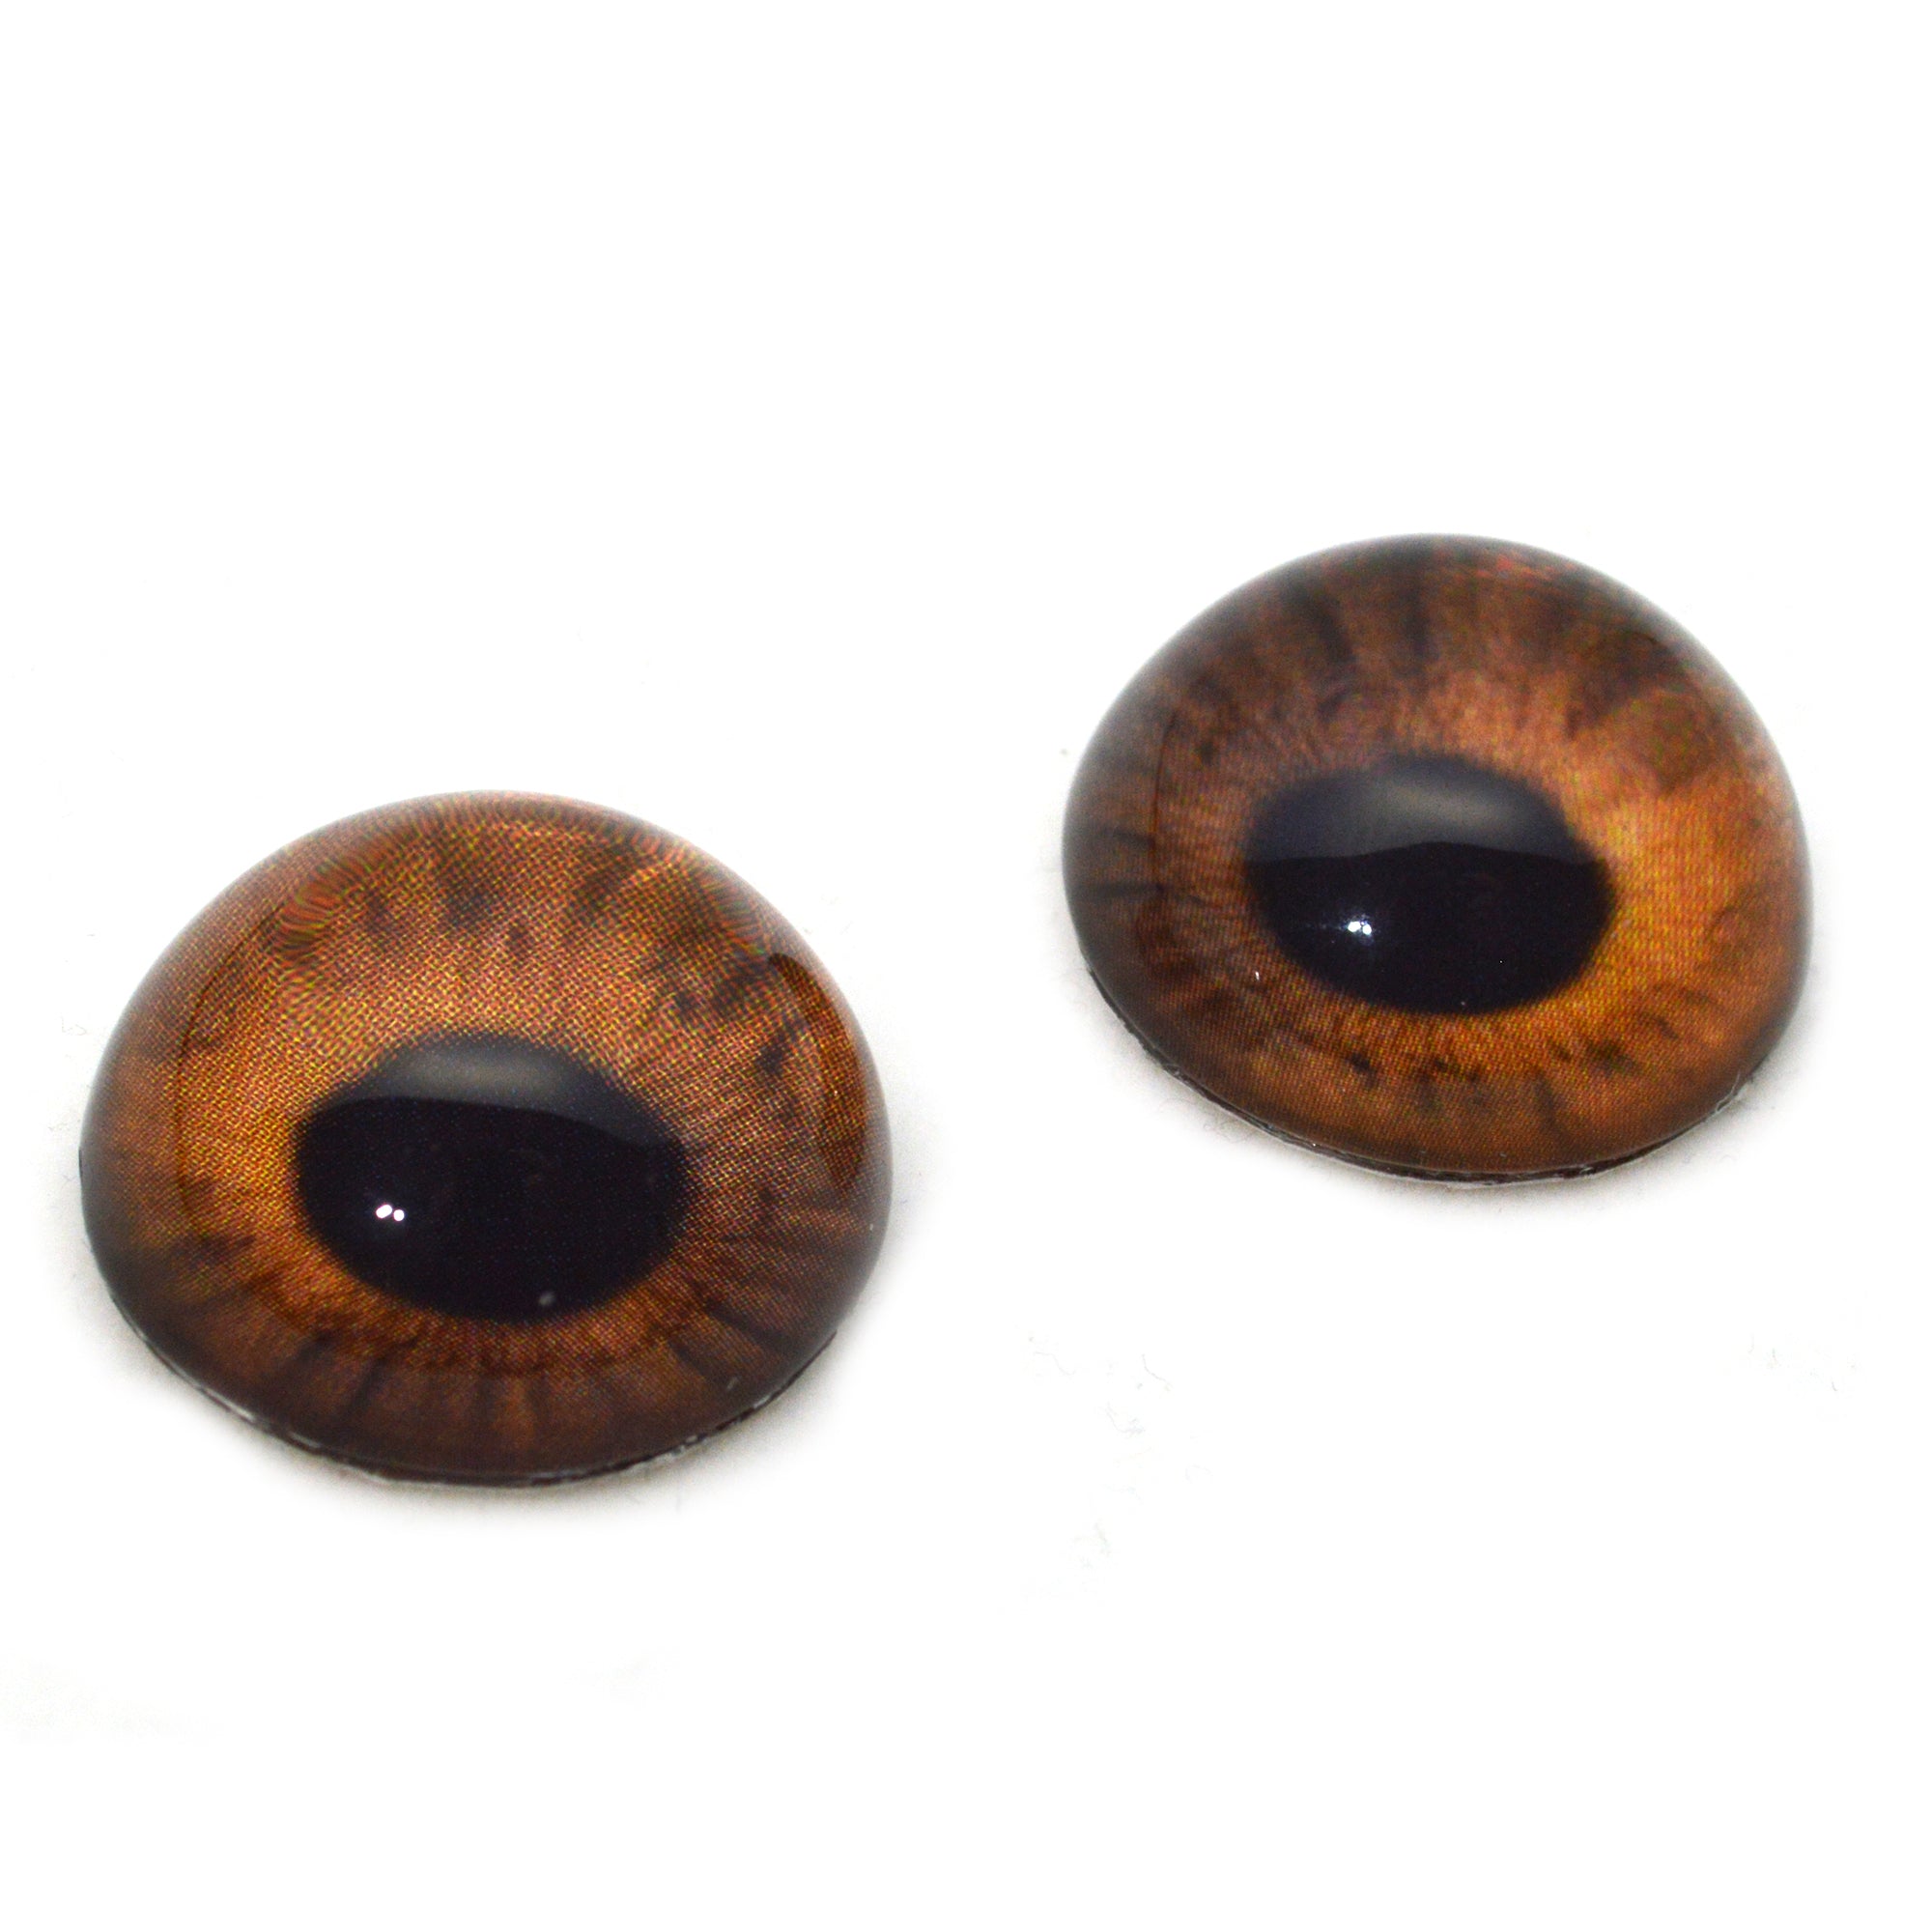  14mm Pair of Brown Teddy Bear Glass Eyes for Jewelry Making,  Dolls, Sculptures, More